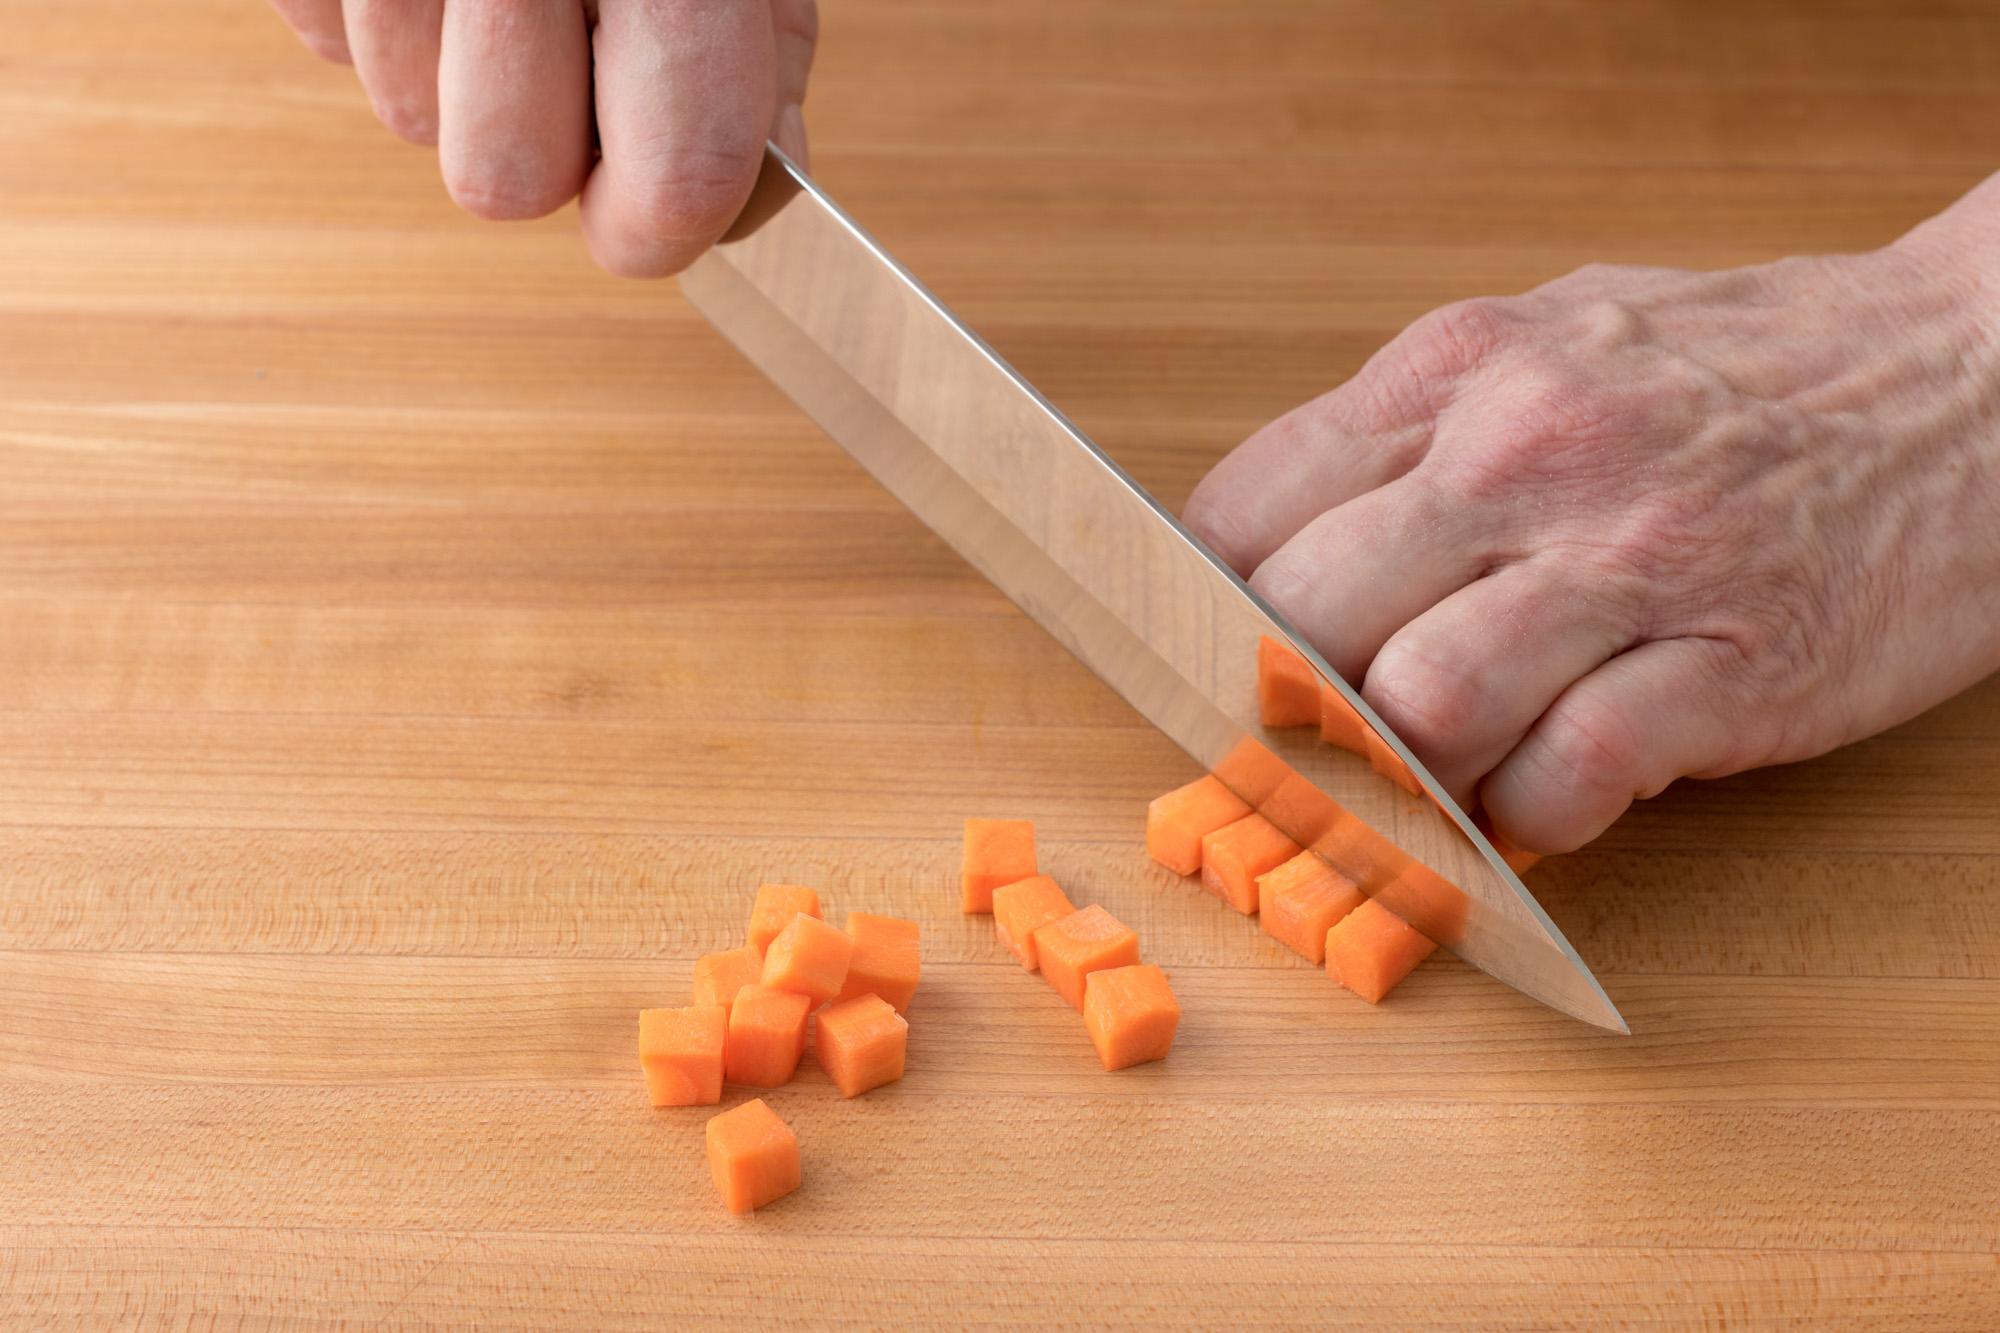 How to Dice Carrots